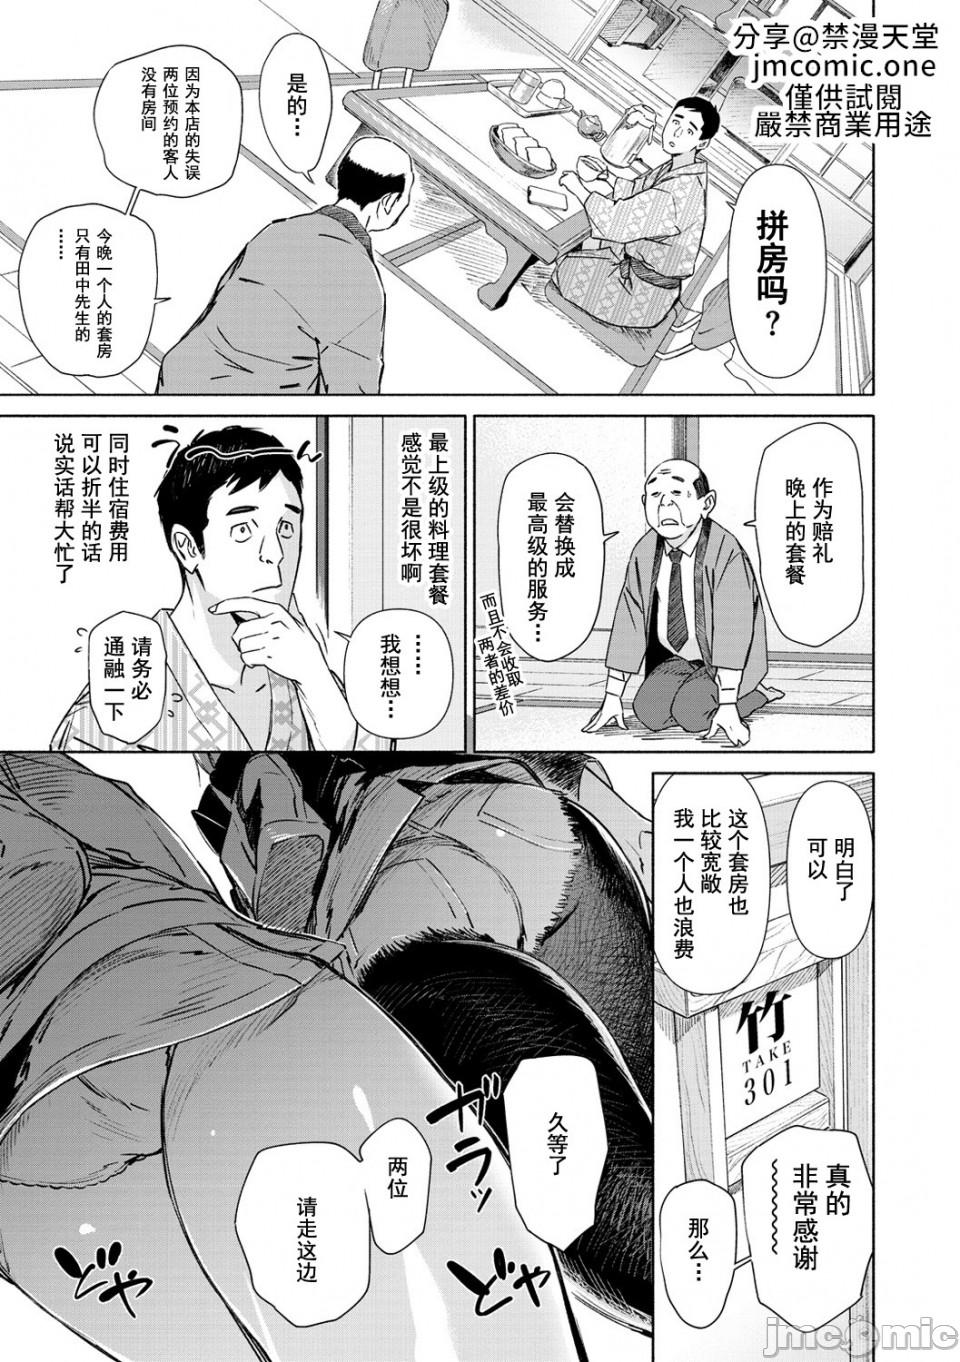 Vadia 恥育玩具 Gay Outinpublic - Page 9